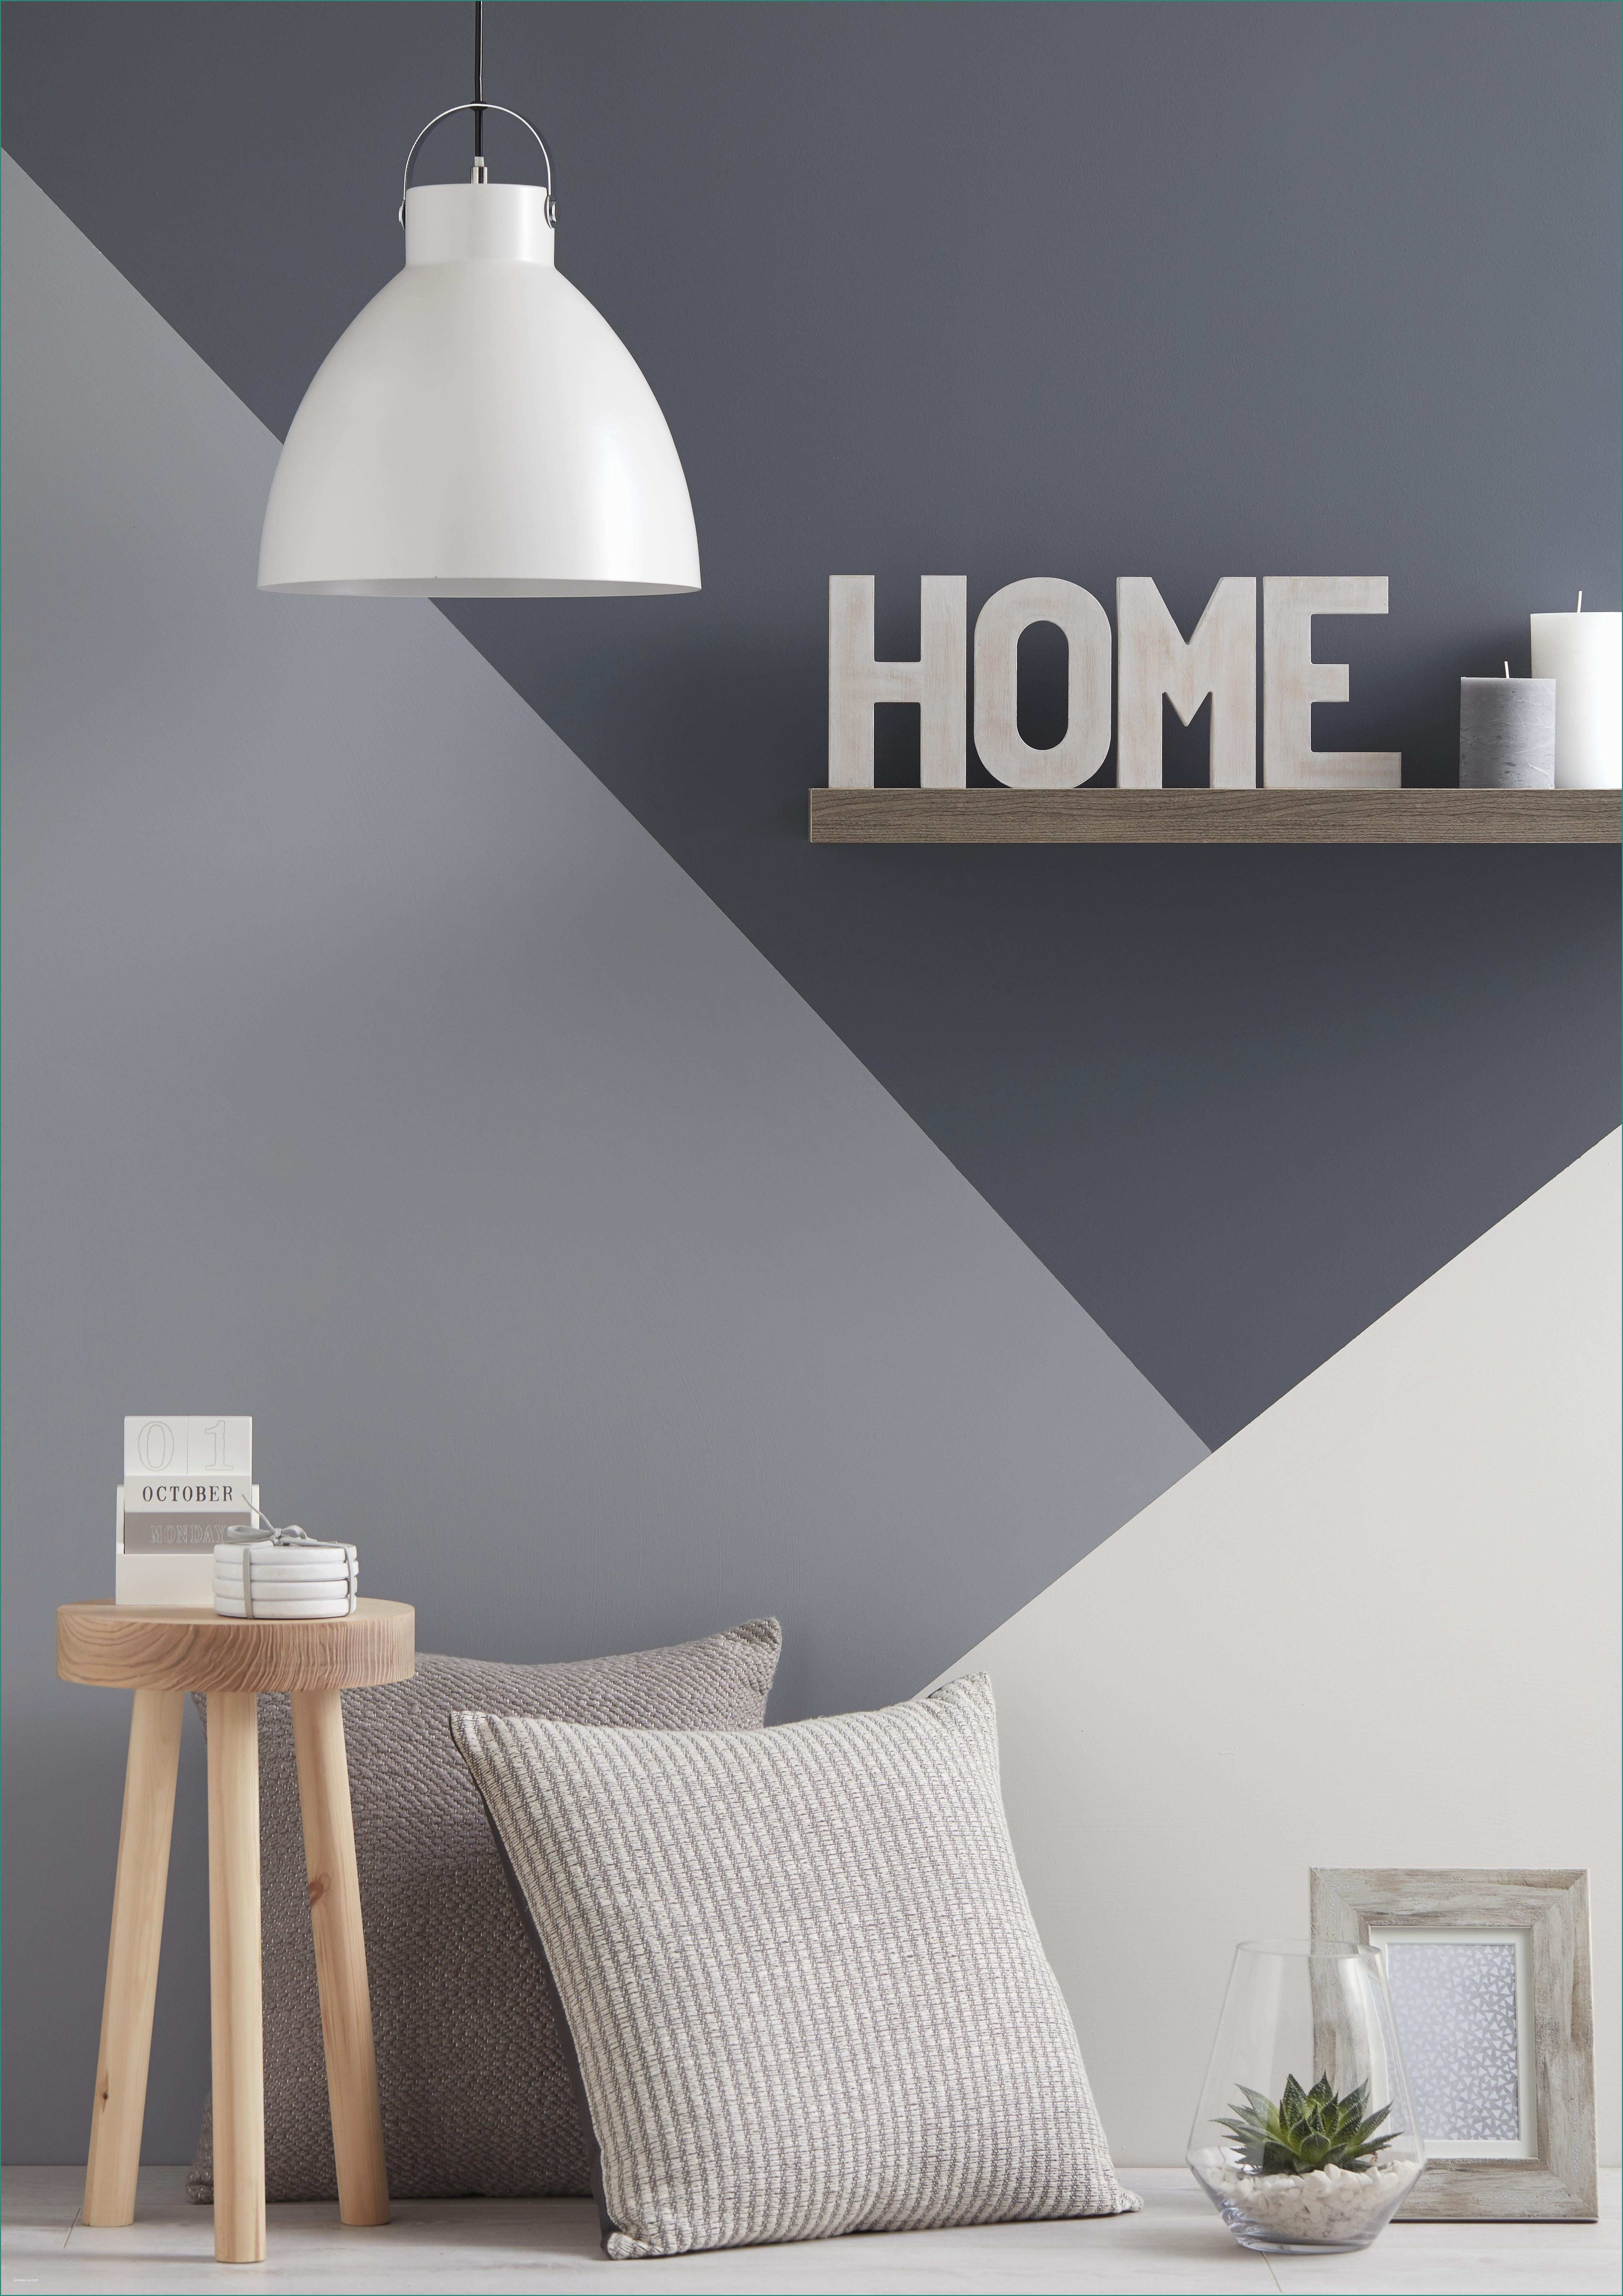 Pitture Decorative Per Pareti E Different Shades Of Grey In Geometric Shapes Really Adds Design